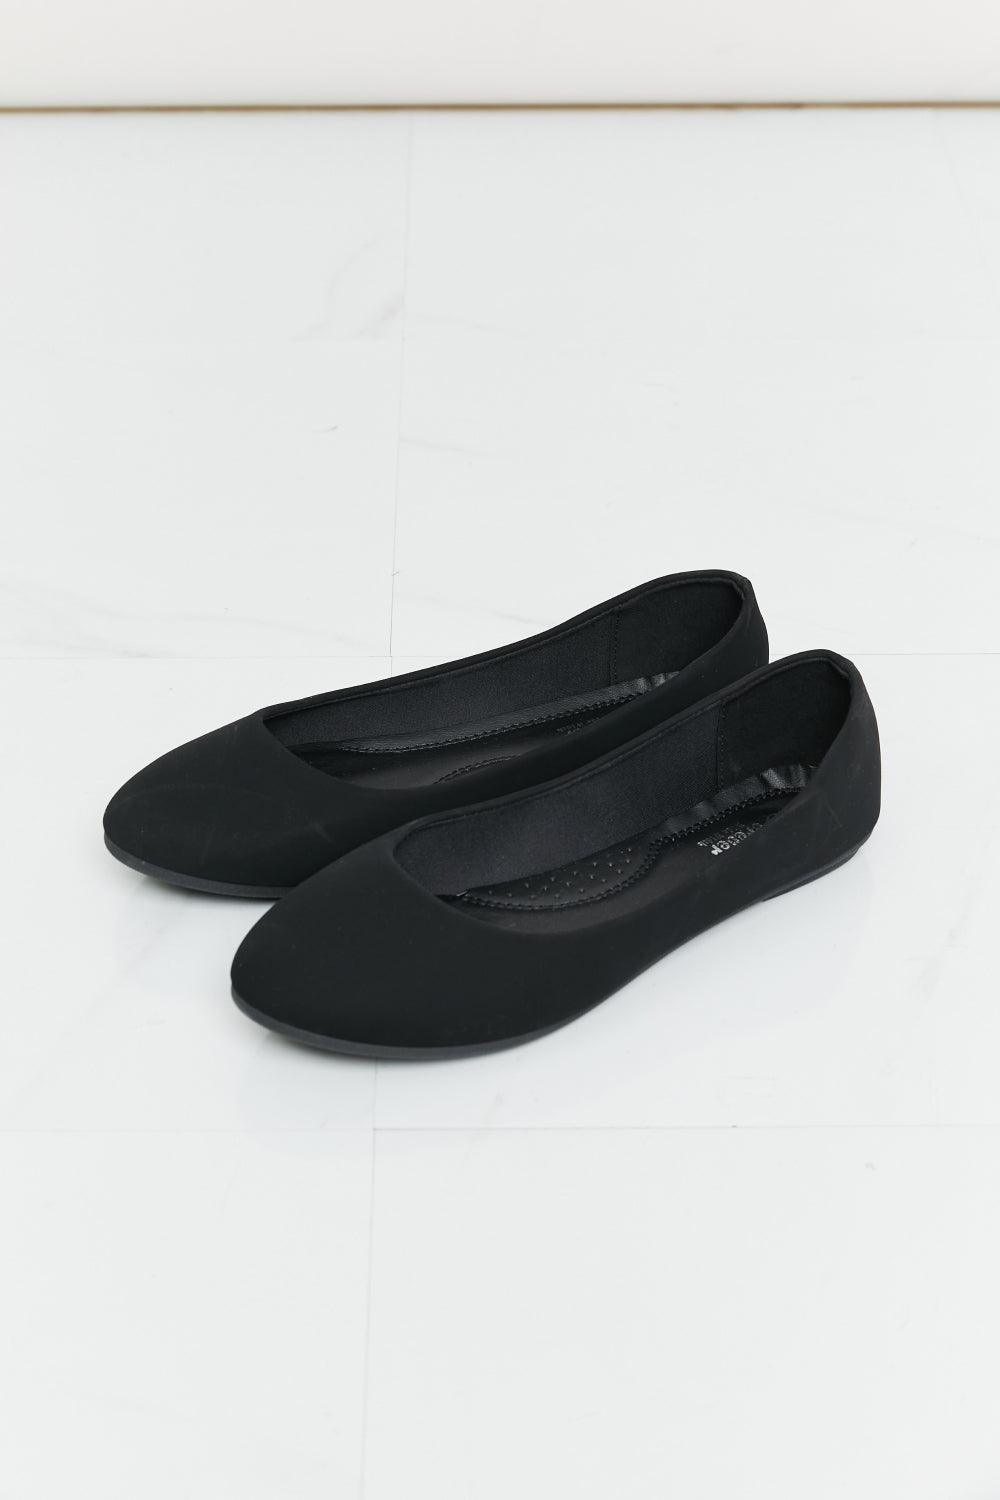 Forever Link Meet You There Flats in Black - Glamorous Boutique USA L.L.C.